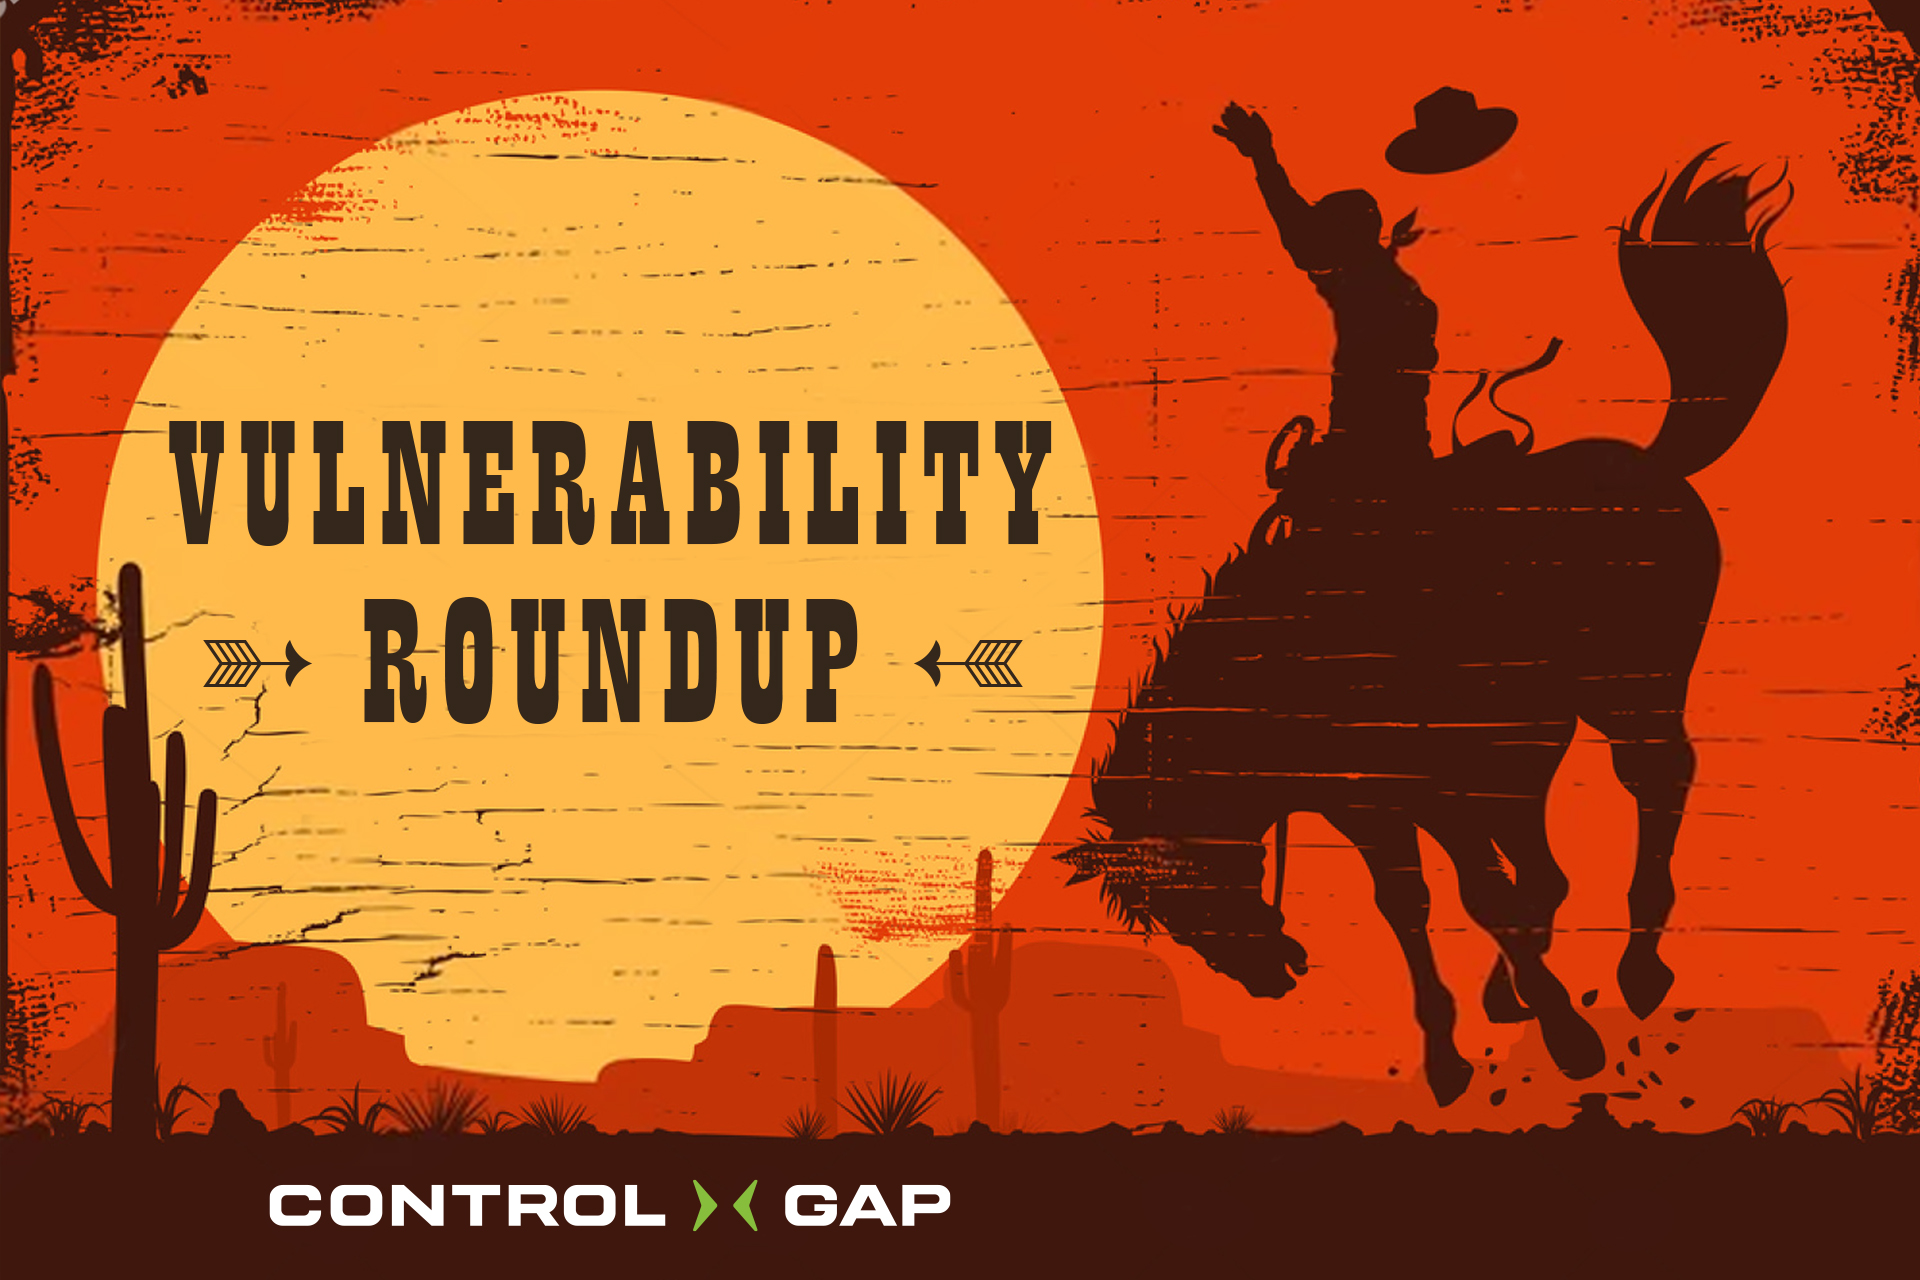 Control Gap Vulnerability Roundup: January 28th to February 3rd